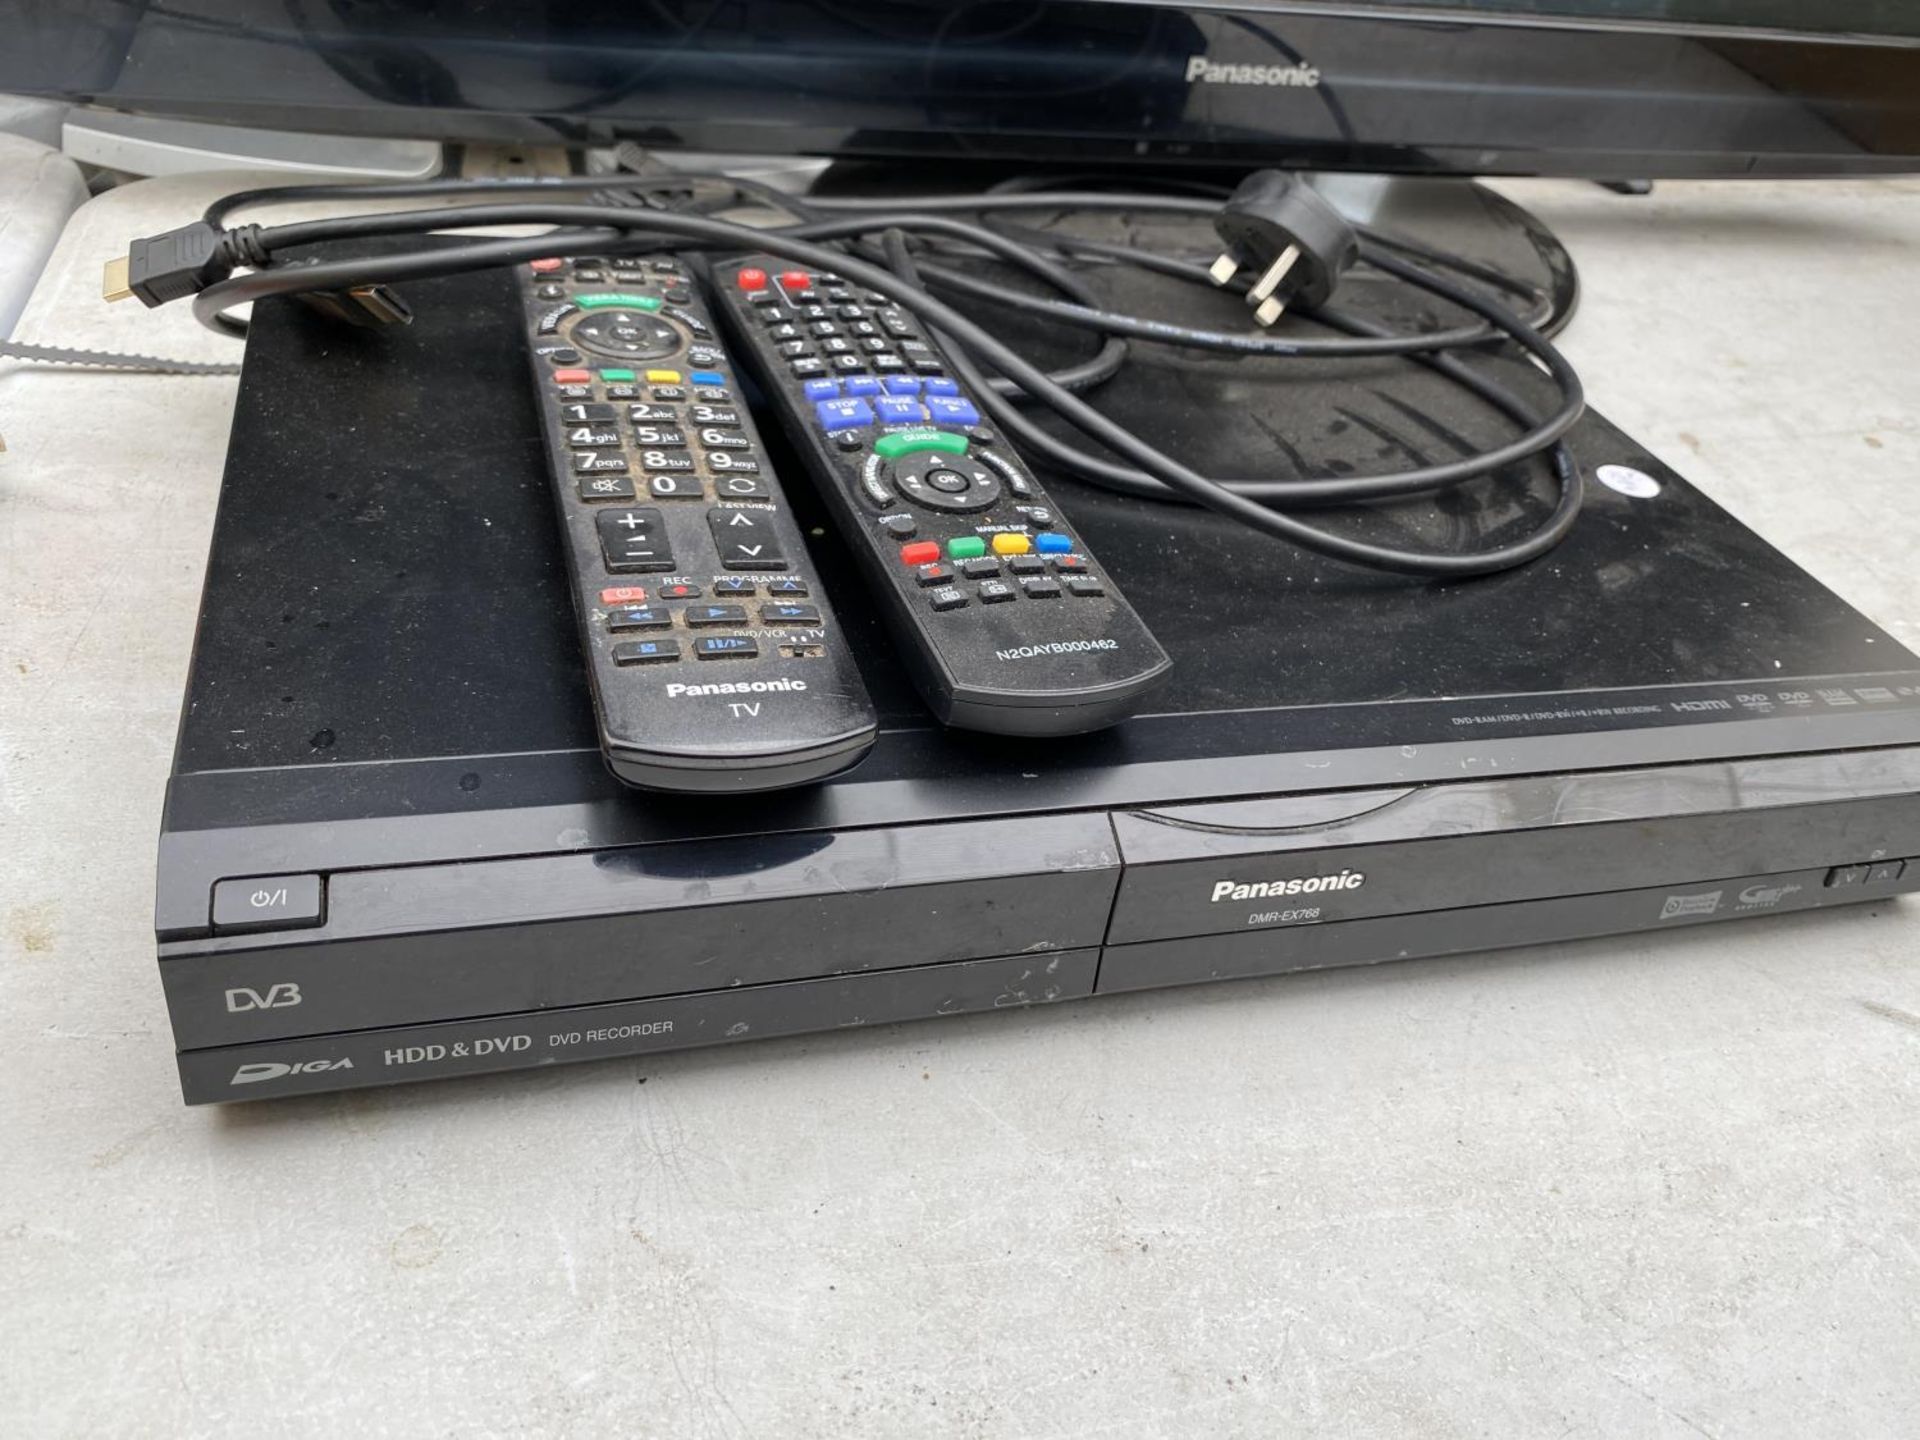 A PANASONIC 42" TELEVISION WITH PANASONIC DVD PLAYER AND TWO REMOTE CONTROLS - Image 2 of 2